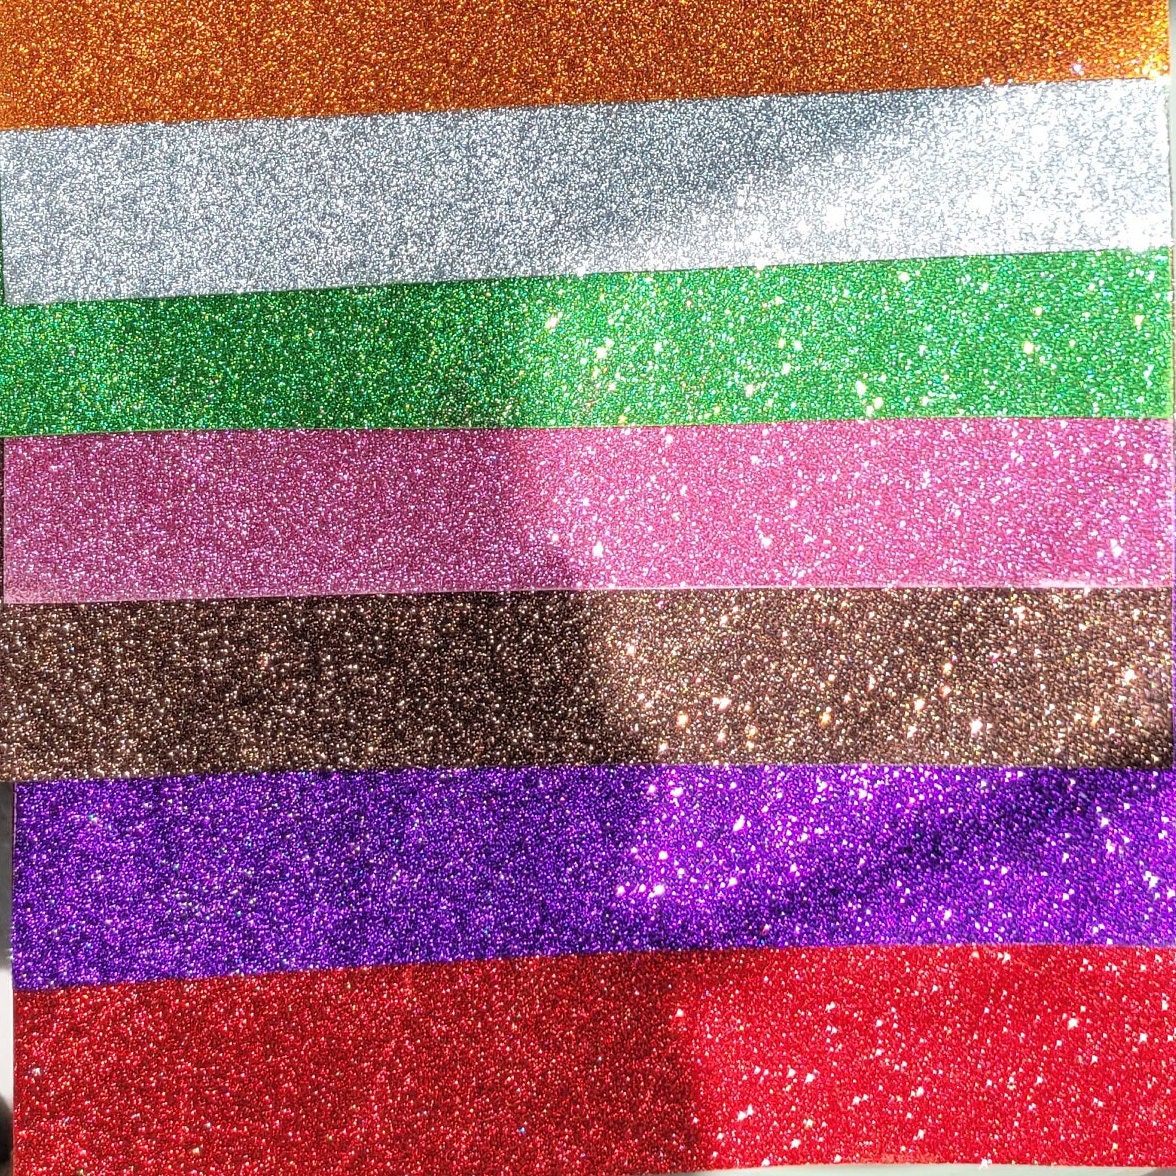 Gold Glitter 10 Pack 12 X 20 EVA Foam Sheets Arts and Crafts 2MM Thickness  